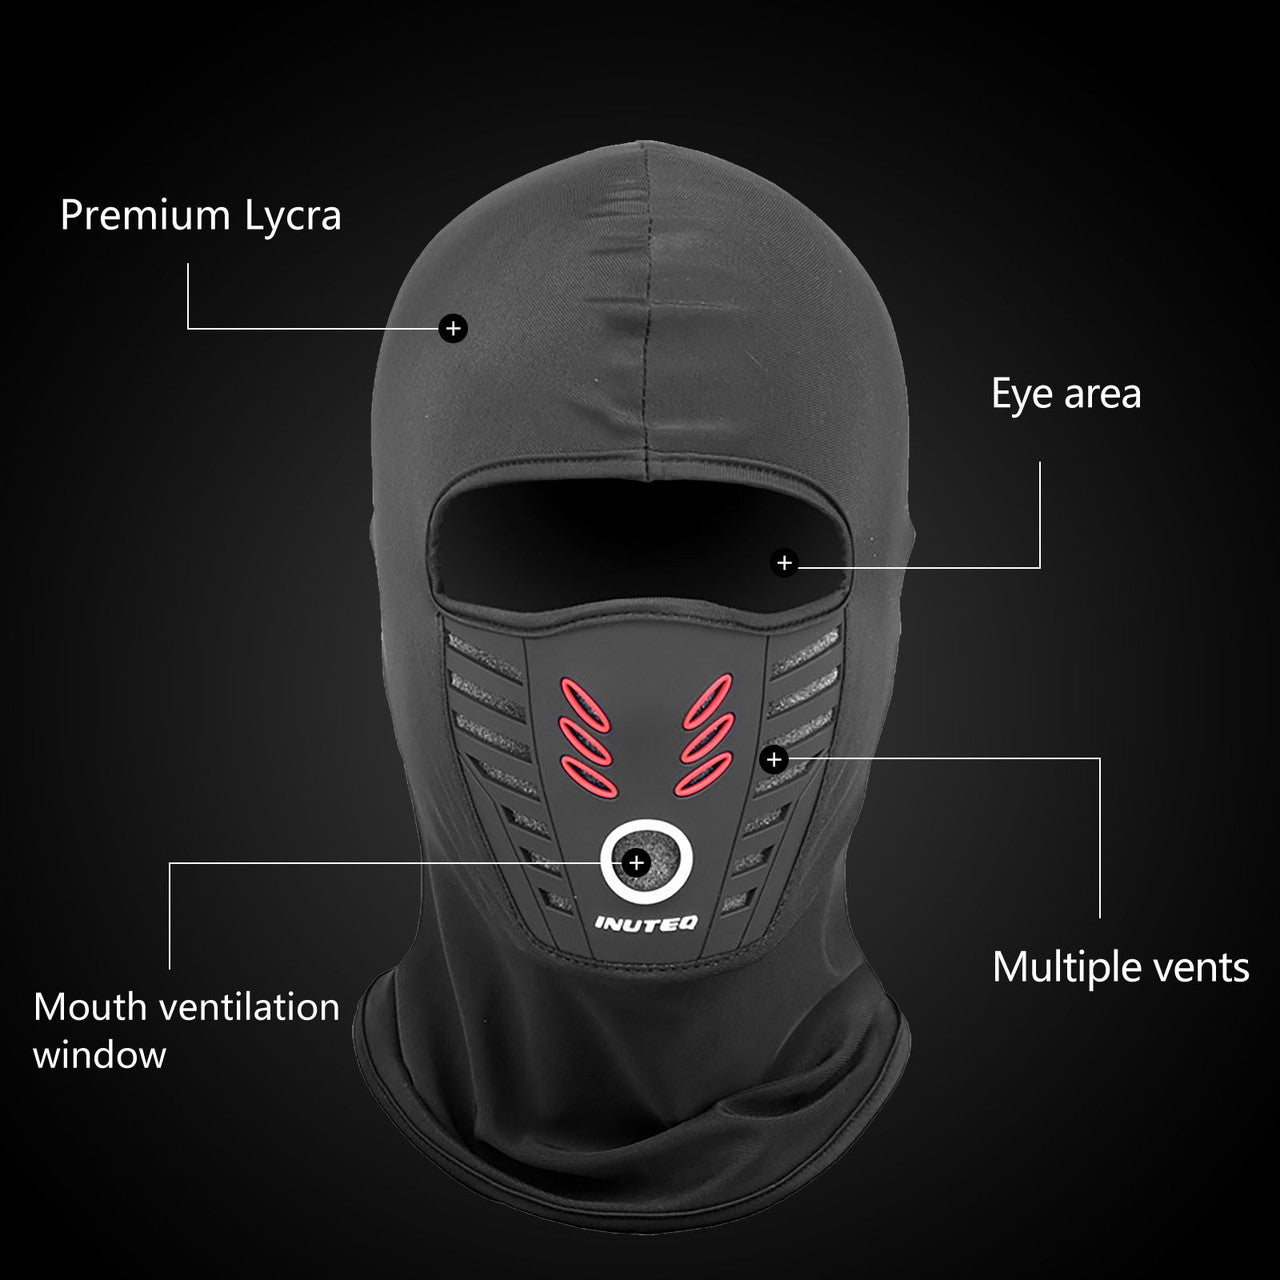 Water Resistant and Windproof Thermal Retention Face Mask, Cold Weather Face Mask, Cycling Motorcycle Neck Warmer Hood Winter Gear for Men Women, Black